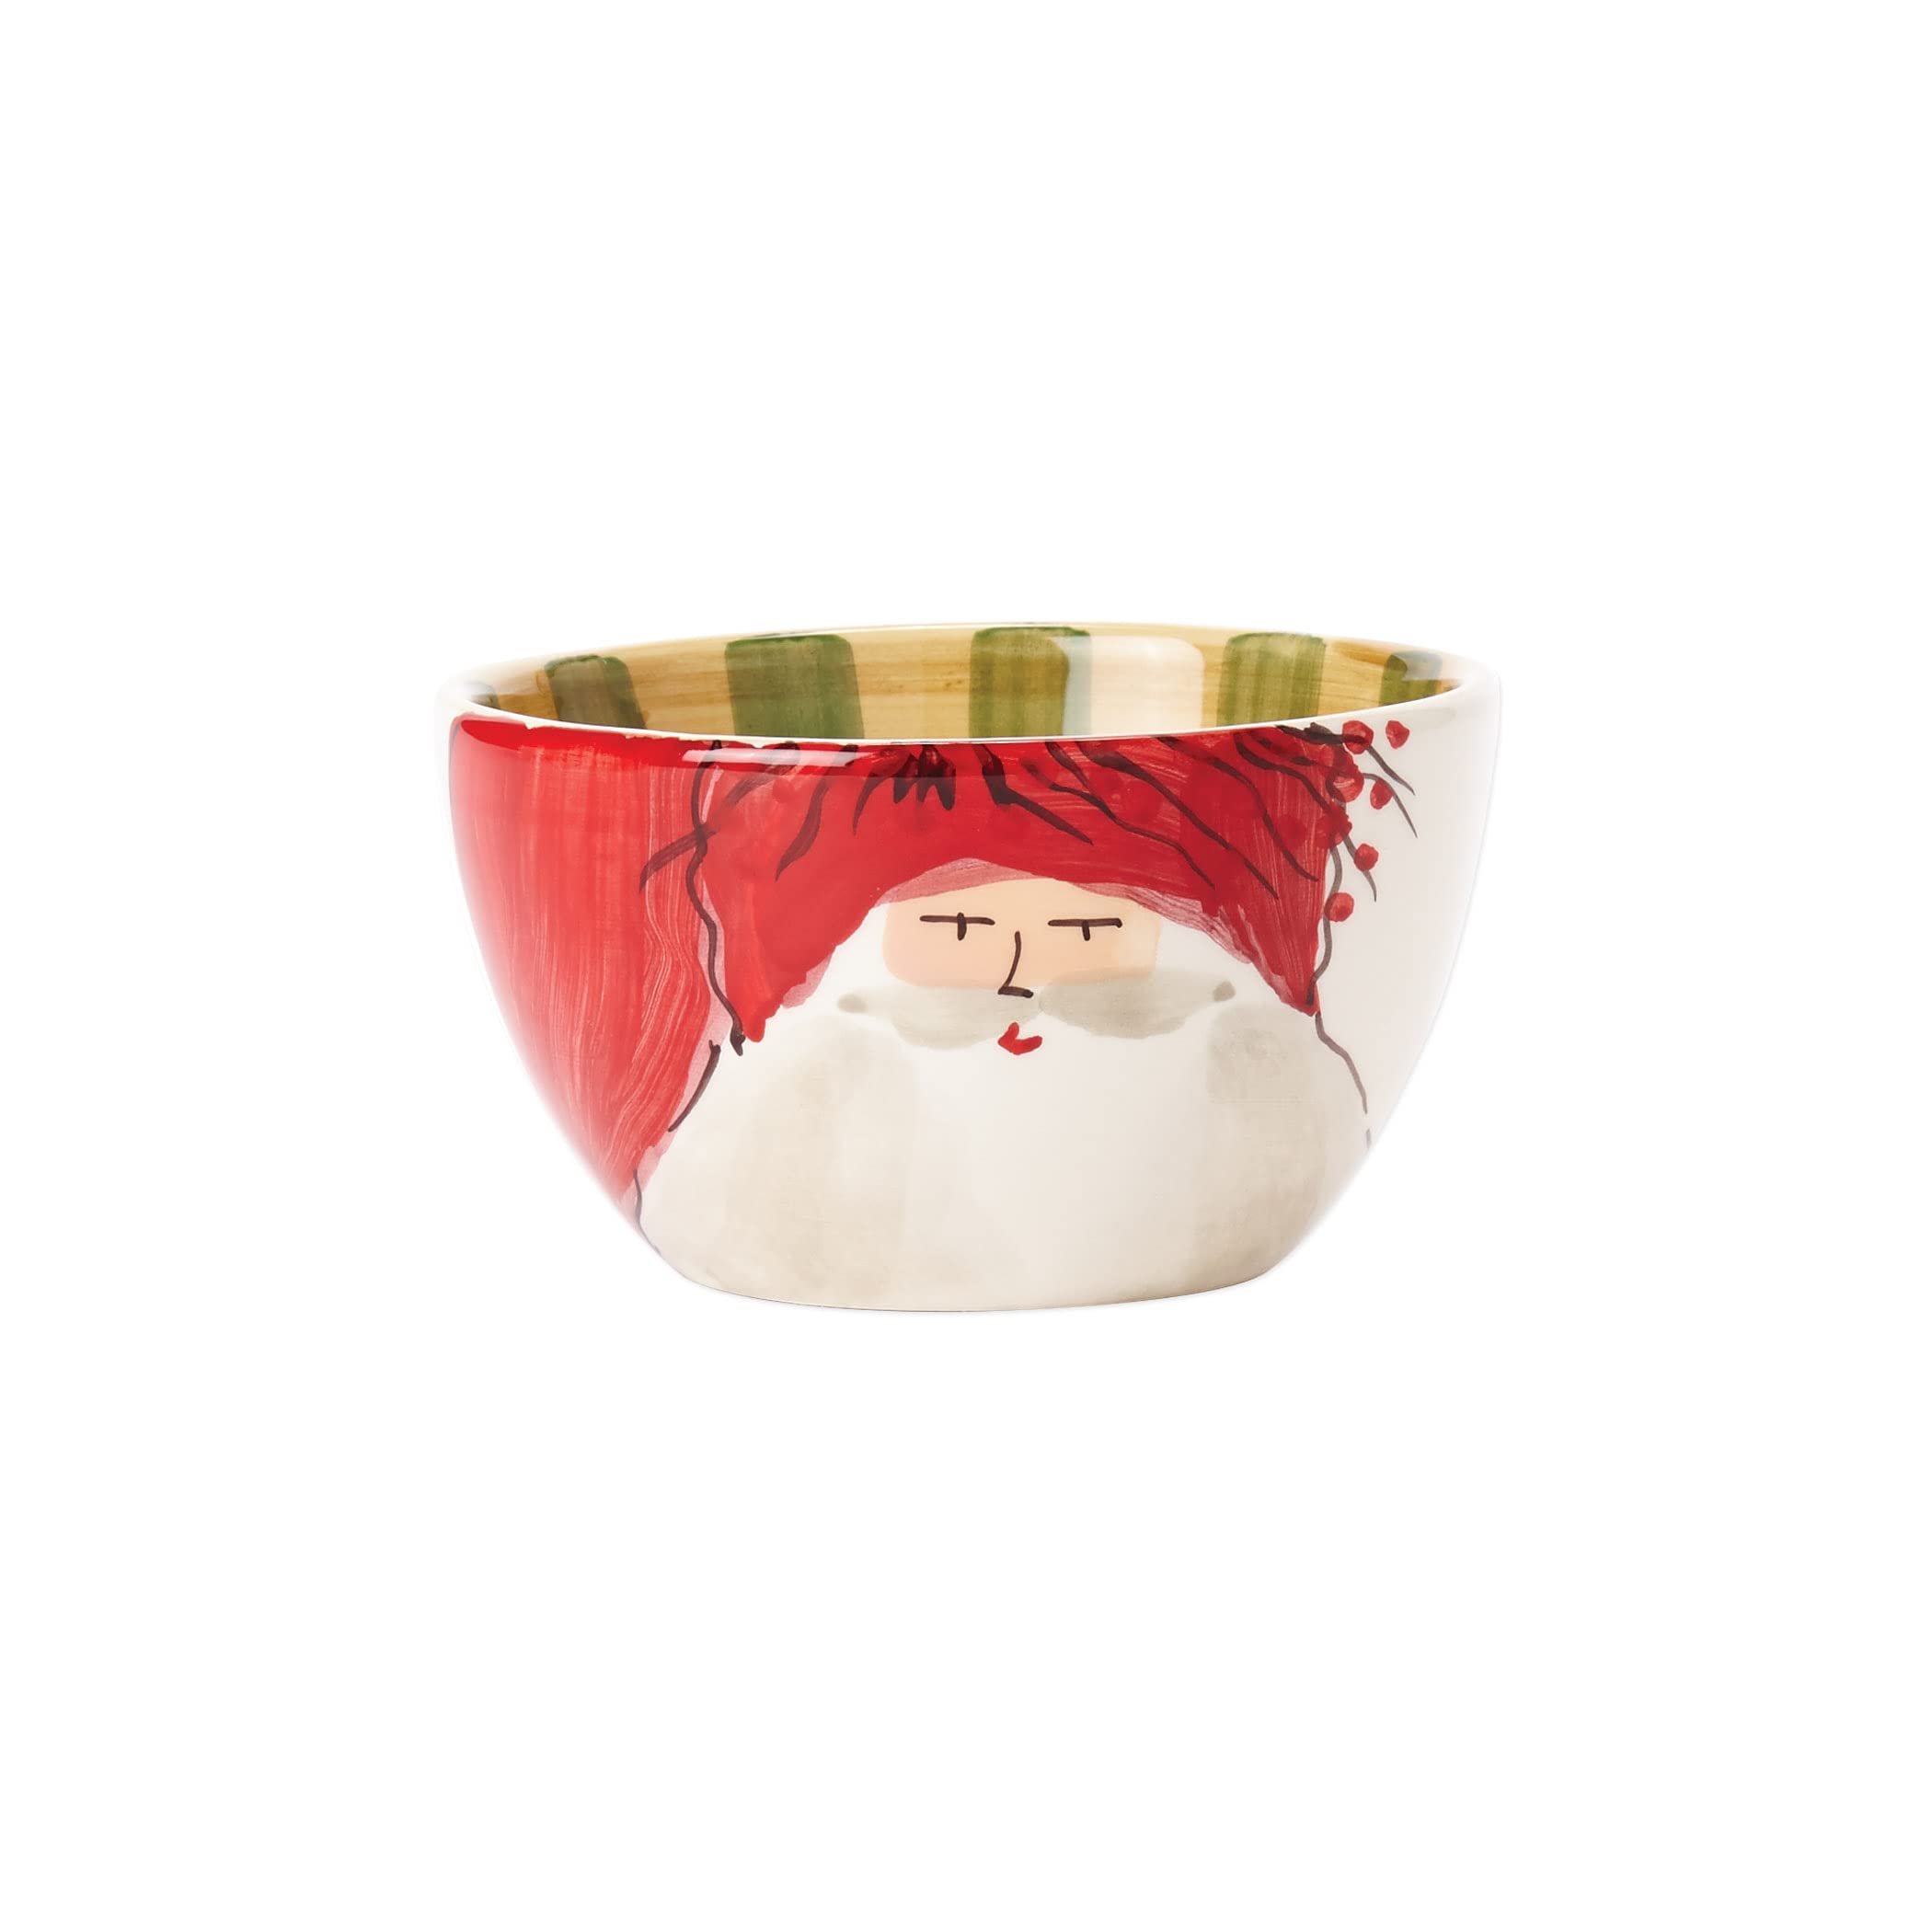 Vietri Old St. Nick Assorted Soup/Cereal Bowls, Set/4, Earthenware Kitchen/Dining Deep Oatmeal Dish